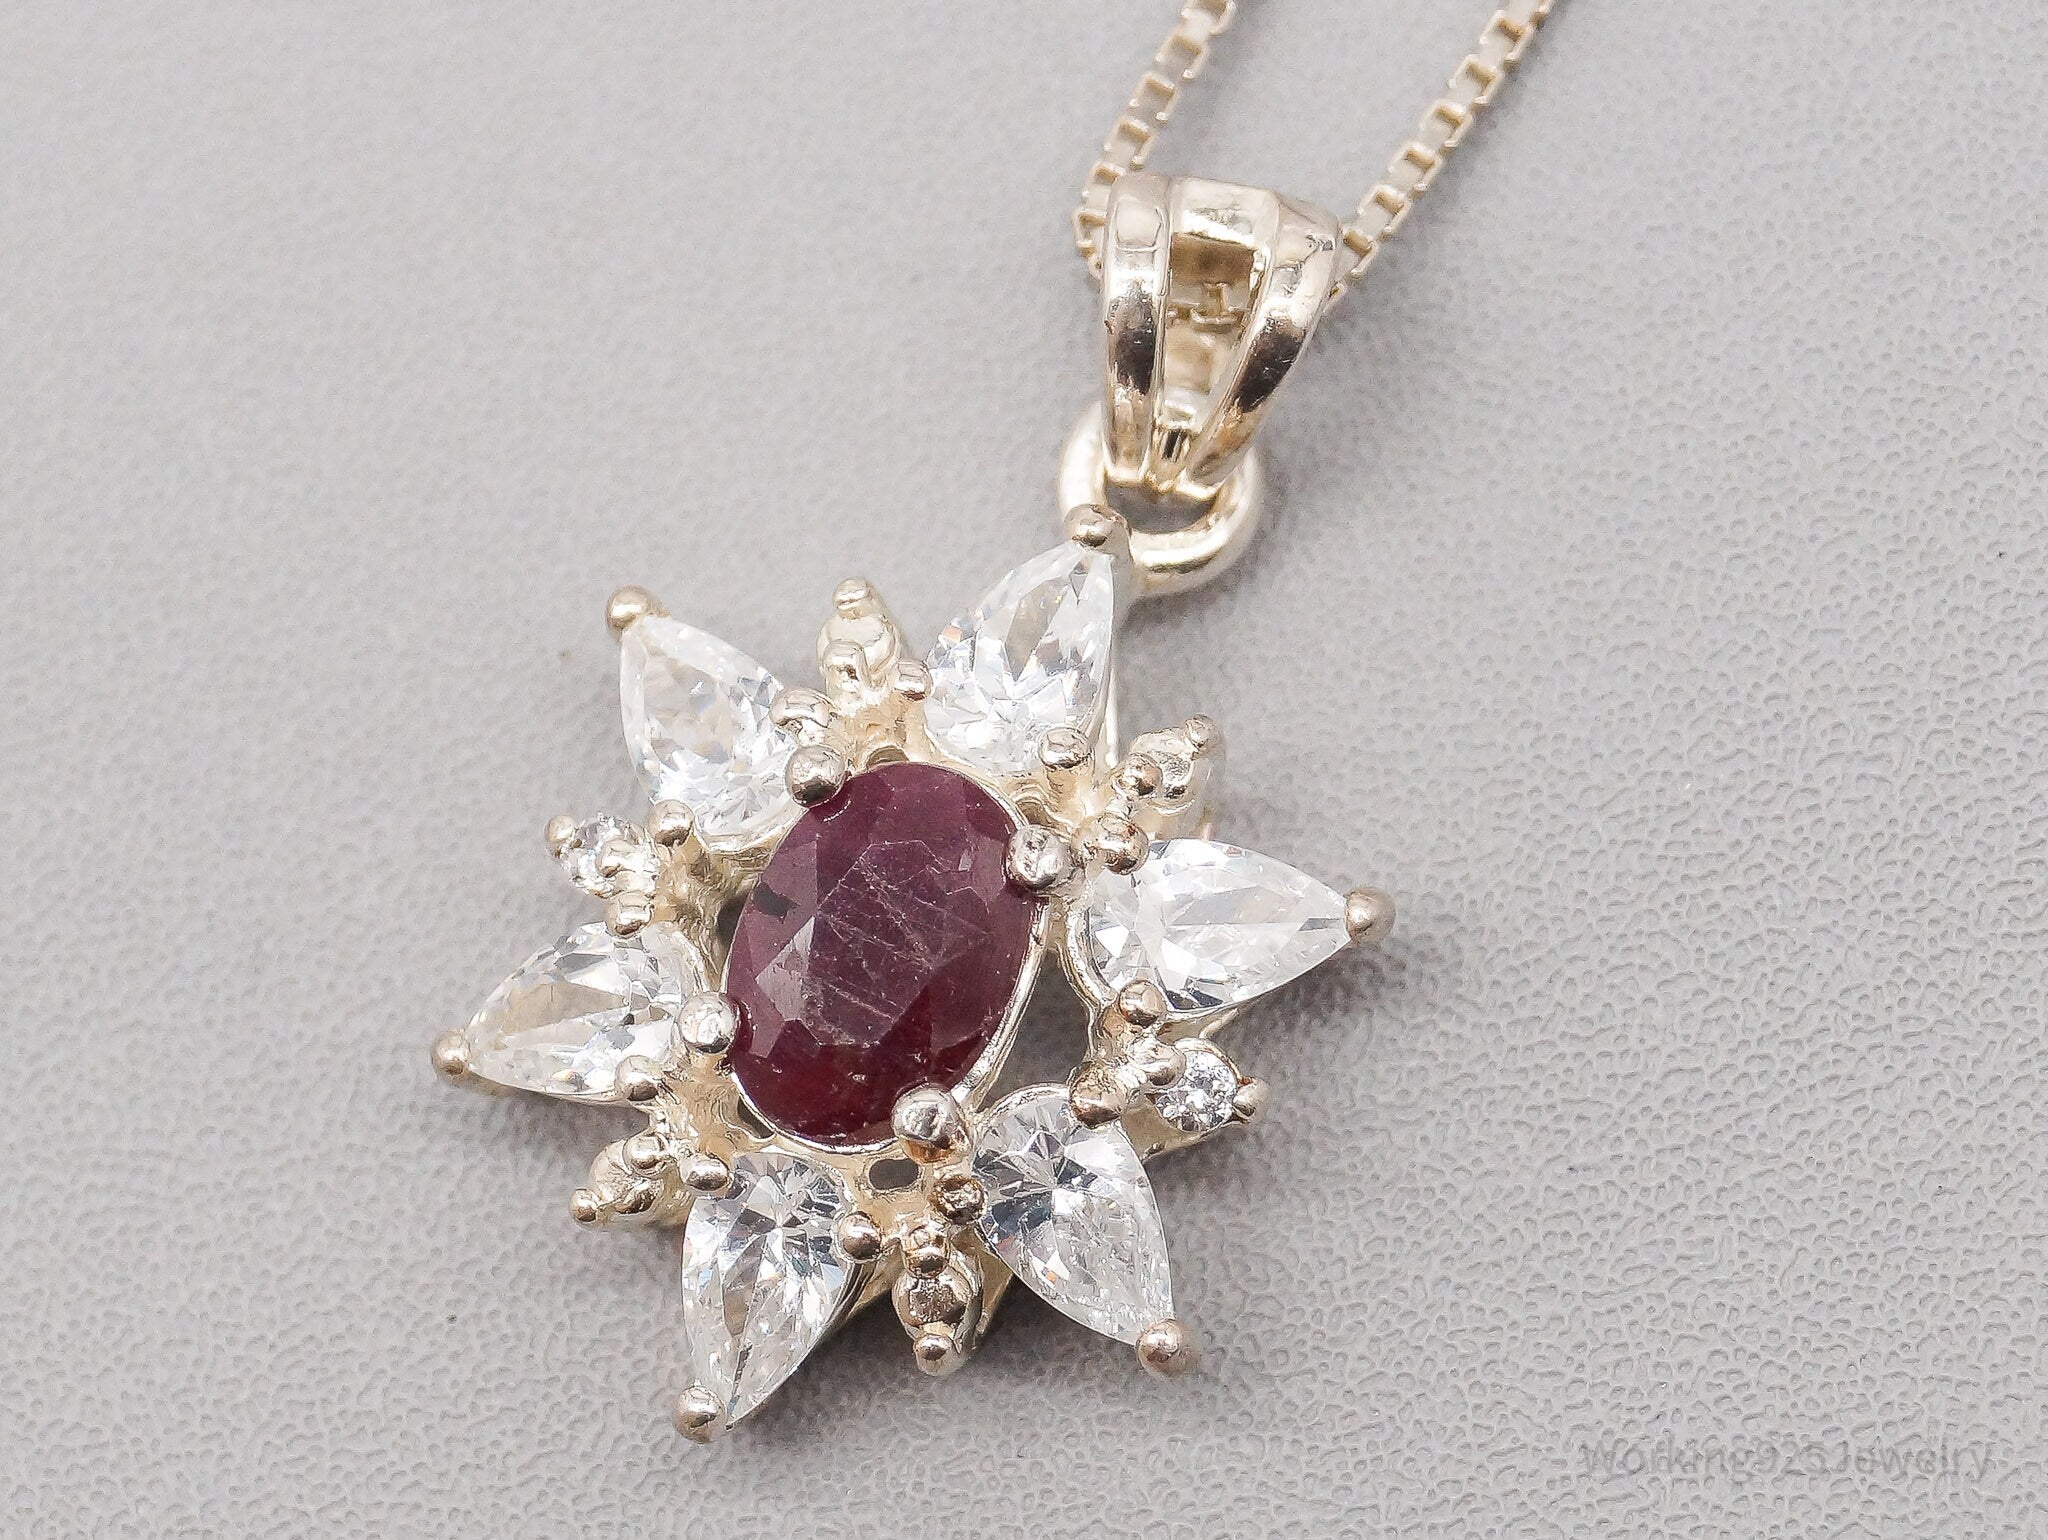 Vintage Raw Cut Ruby Cubic Zirconia Flower Sterling Silver Necklace 18"